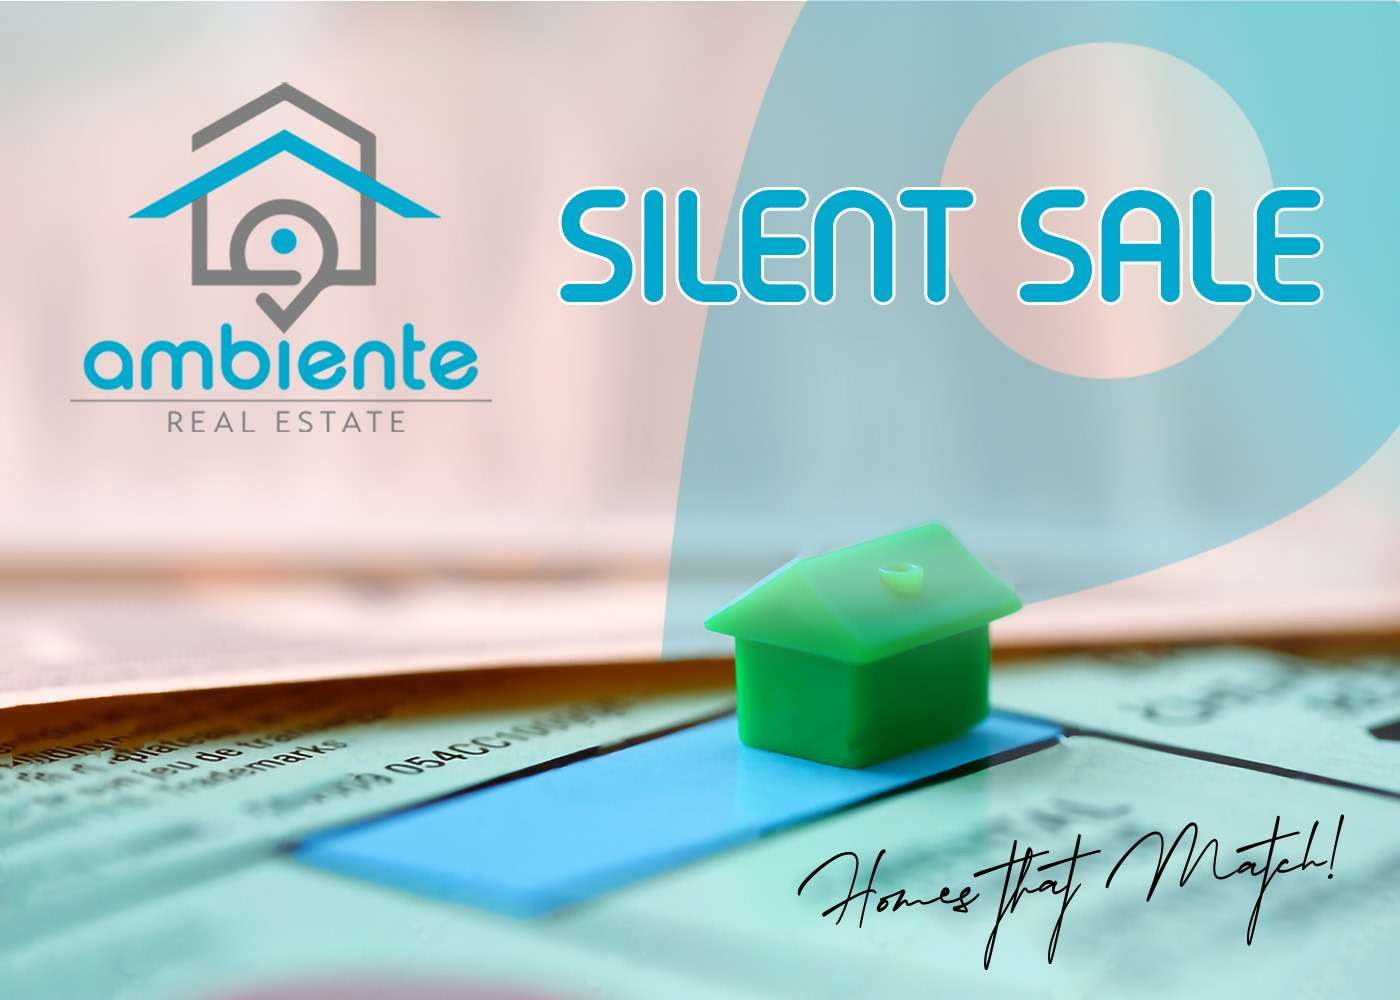 Silent sale new apartments centrally located on Curacao